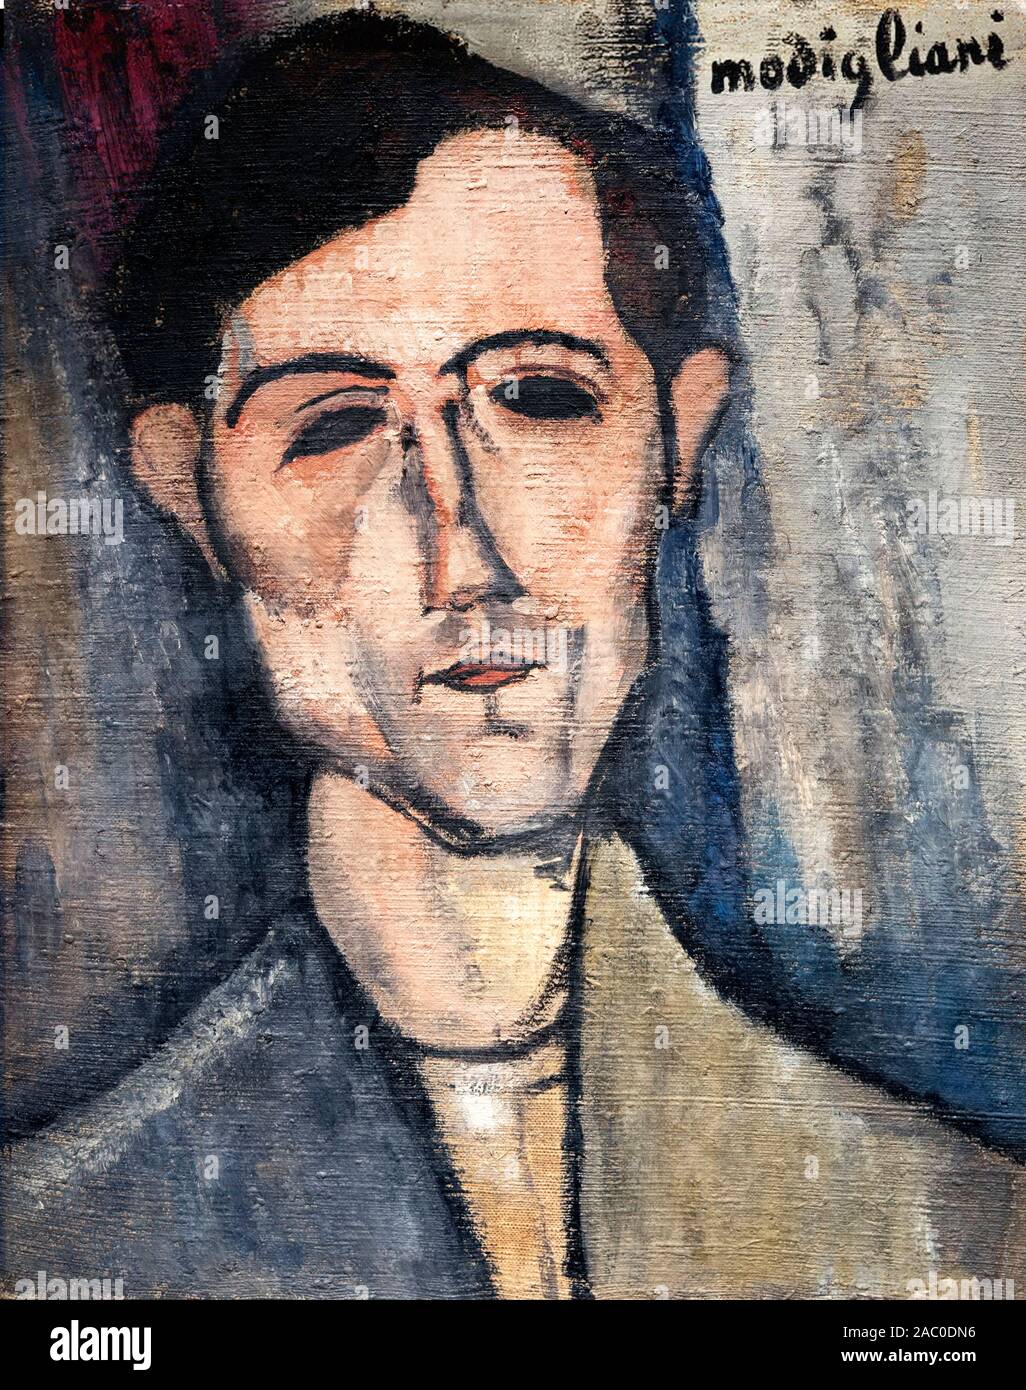 A Man by Amedeo Clemente Modigliani (1884-1920), oil on canvas, 1916 Stock Photo